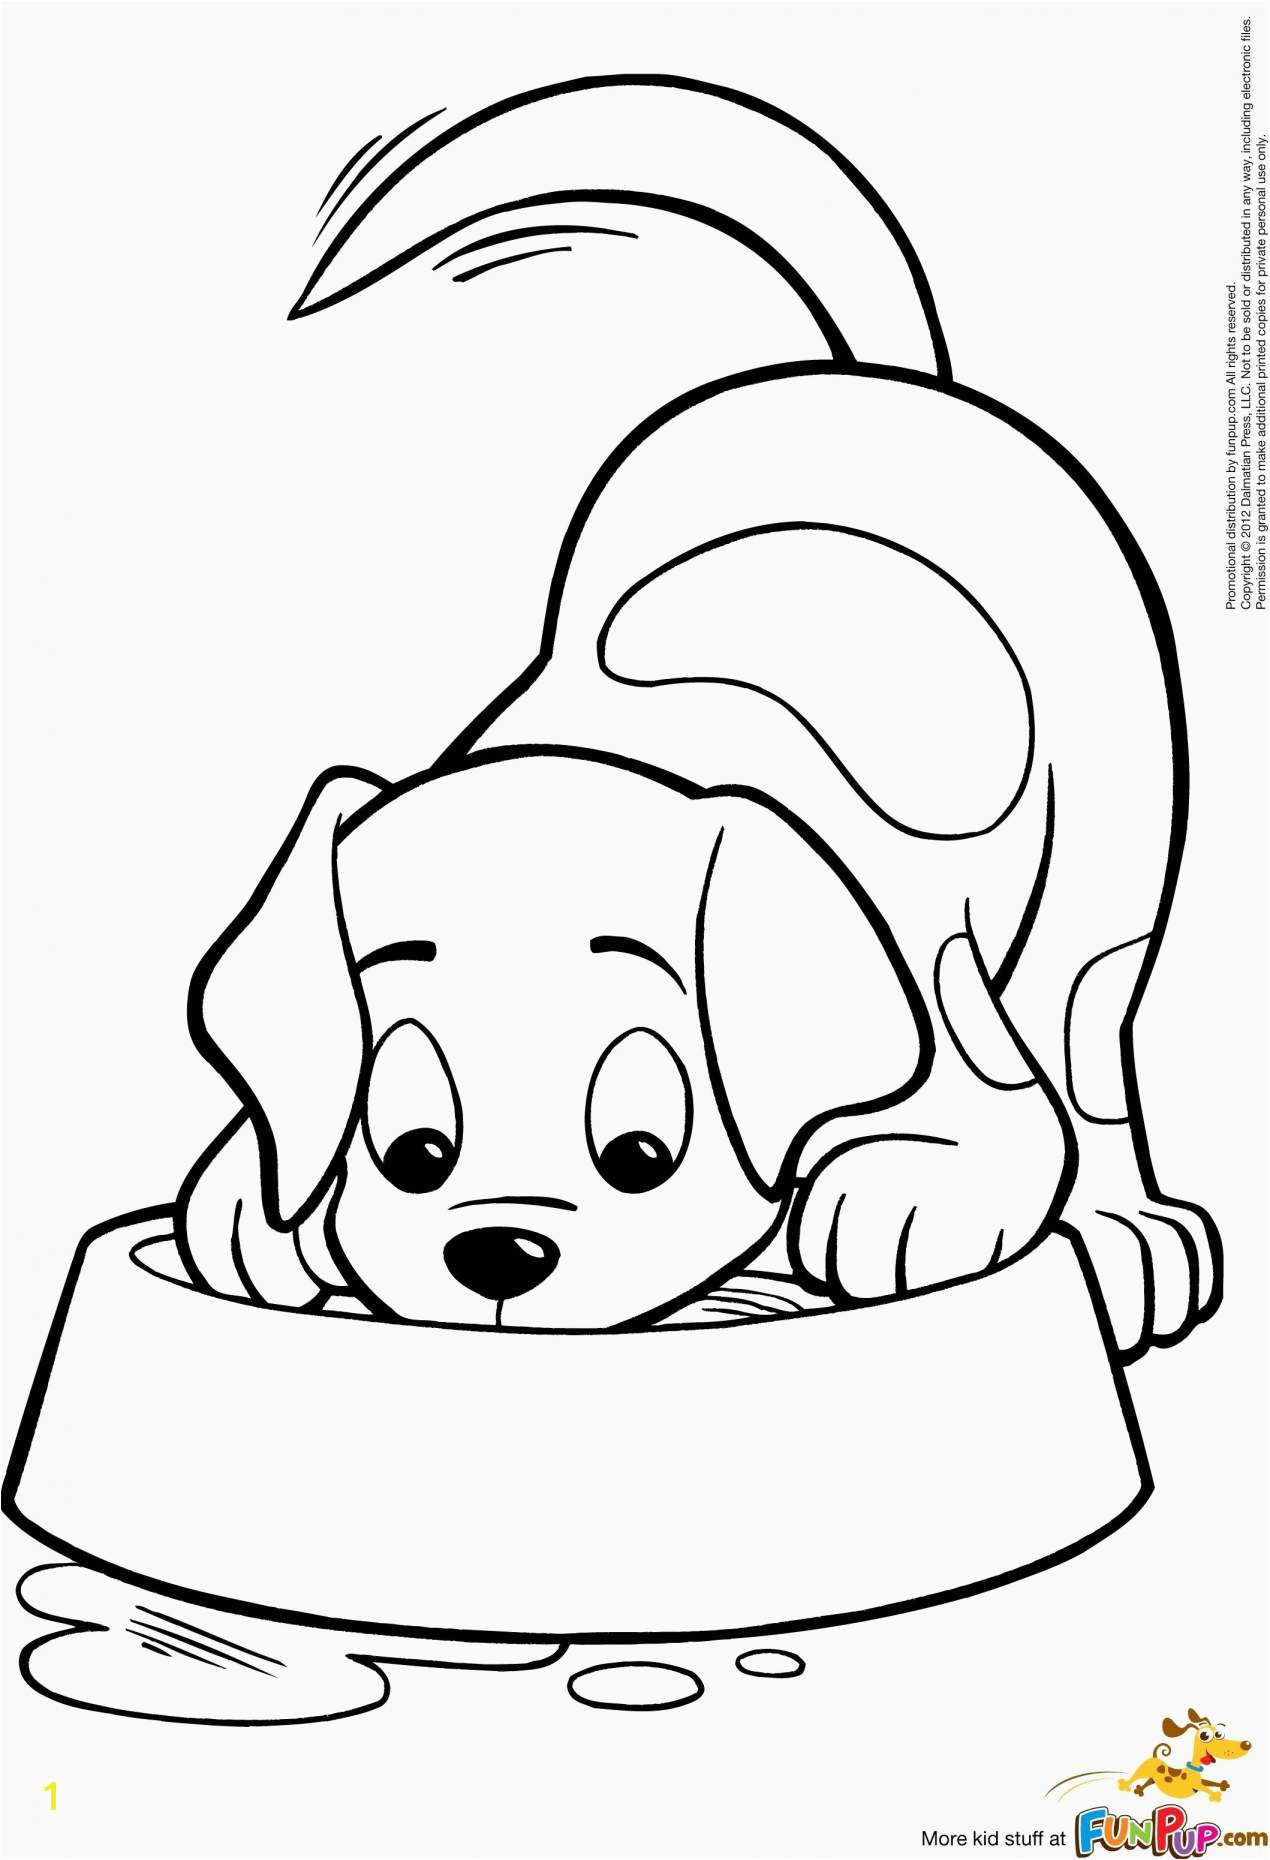 Free Animal Coloring Pages for Kids Free Printable Christmas Bear Coloring Pages Media Cache Ec0